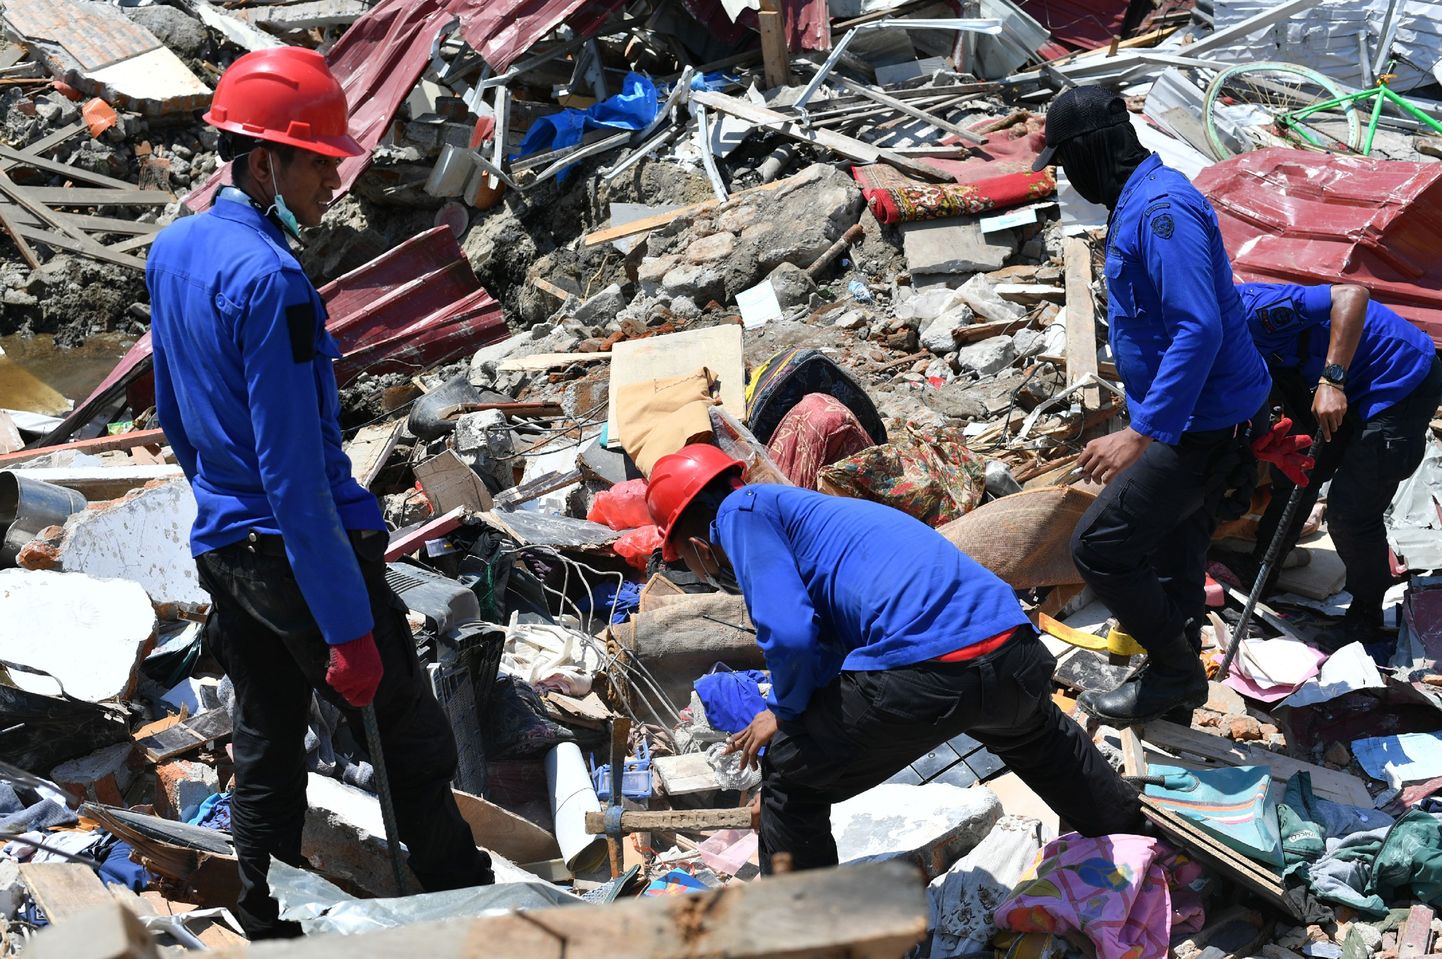 Indonesian search and rescue members look for survivors in Palu, Indonesia's Central Sulawesi on October 2, 2018, after an earthquake and tsunami hit the area on September 28. - The bodies of dozens of students have been pulled from their landslide-swamped church in Sulawesi, officials said on October 2, as an international effort to help nearly 200,000 Indonesia quake-tsunami victims ground into gear. (Photo by Adek BERRY / AFP)